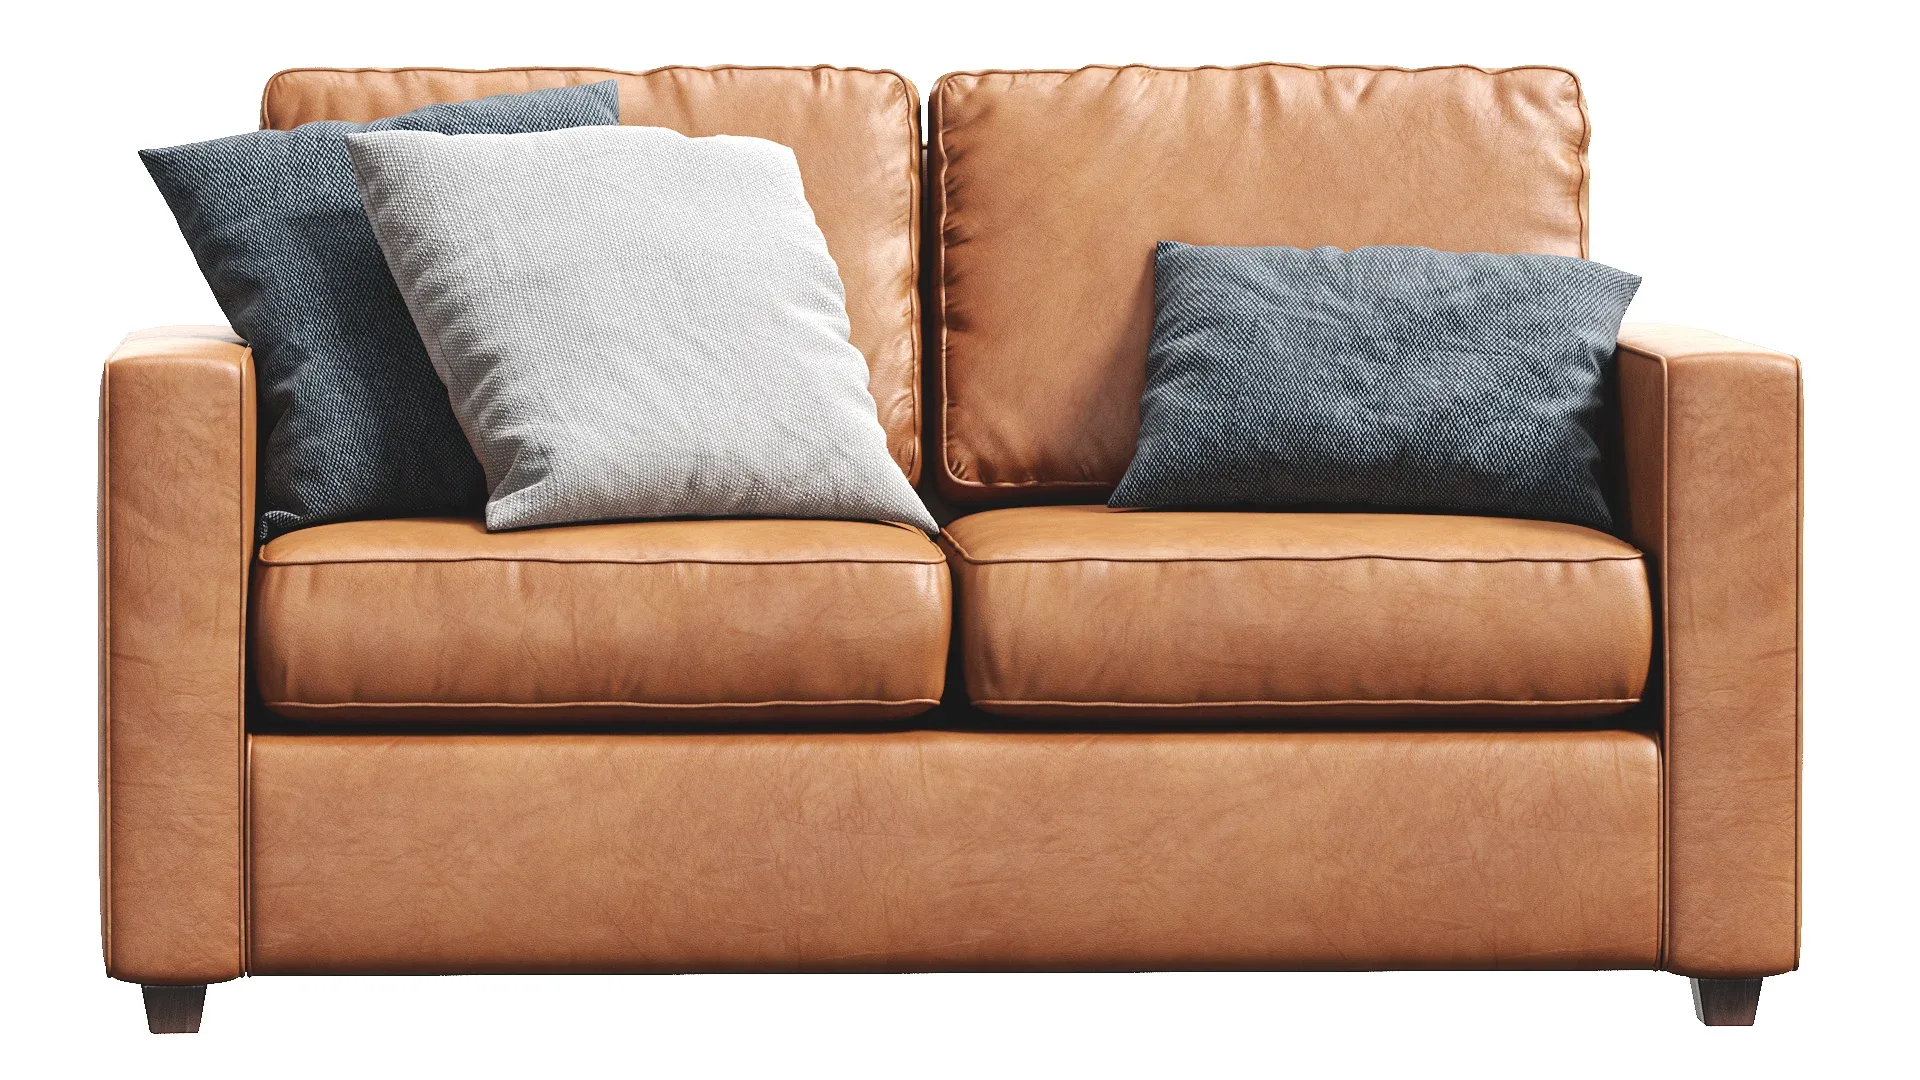 Henry Sofa by West Elm